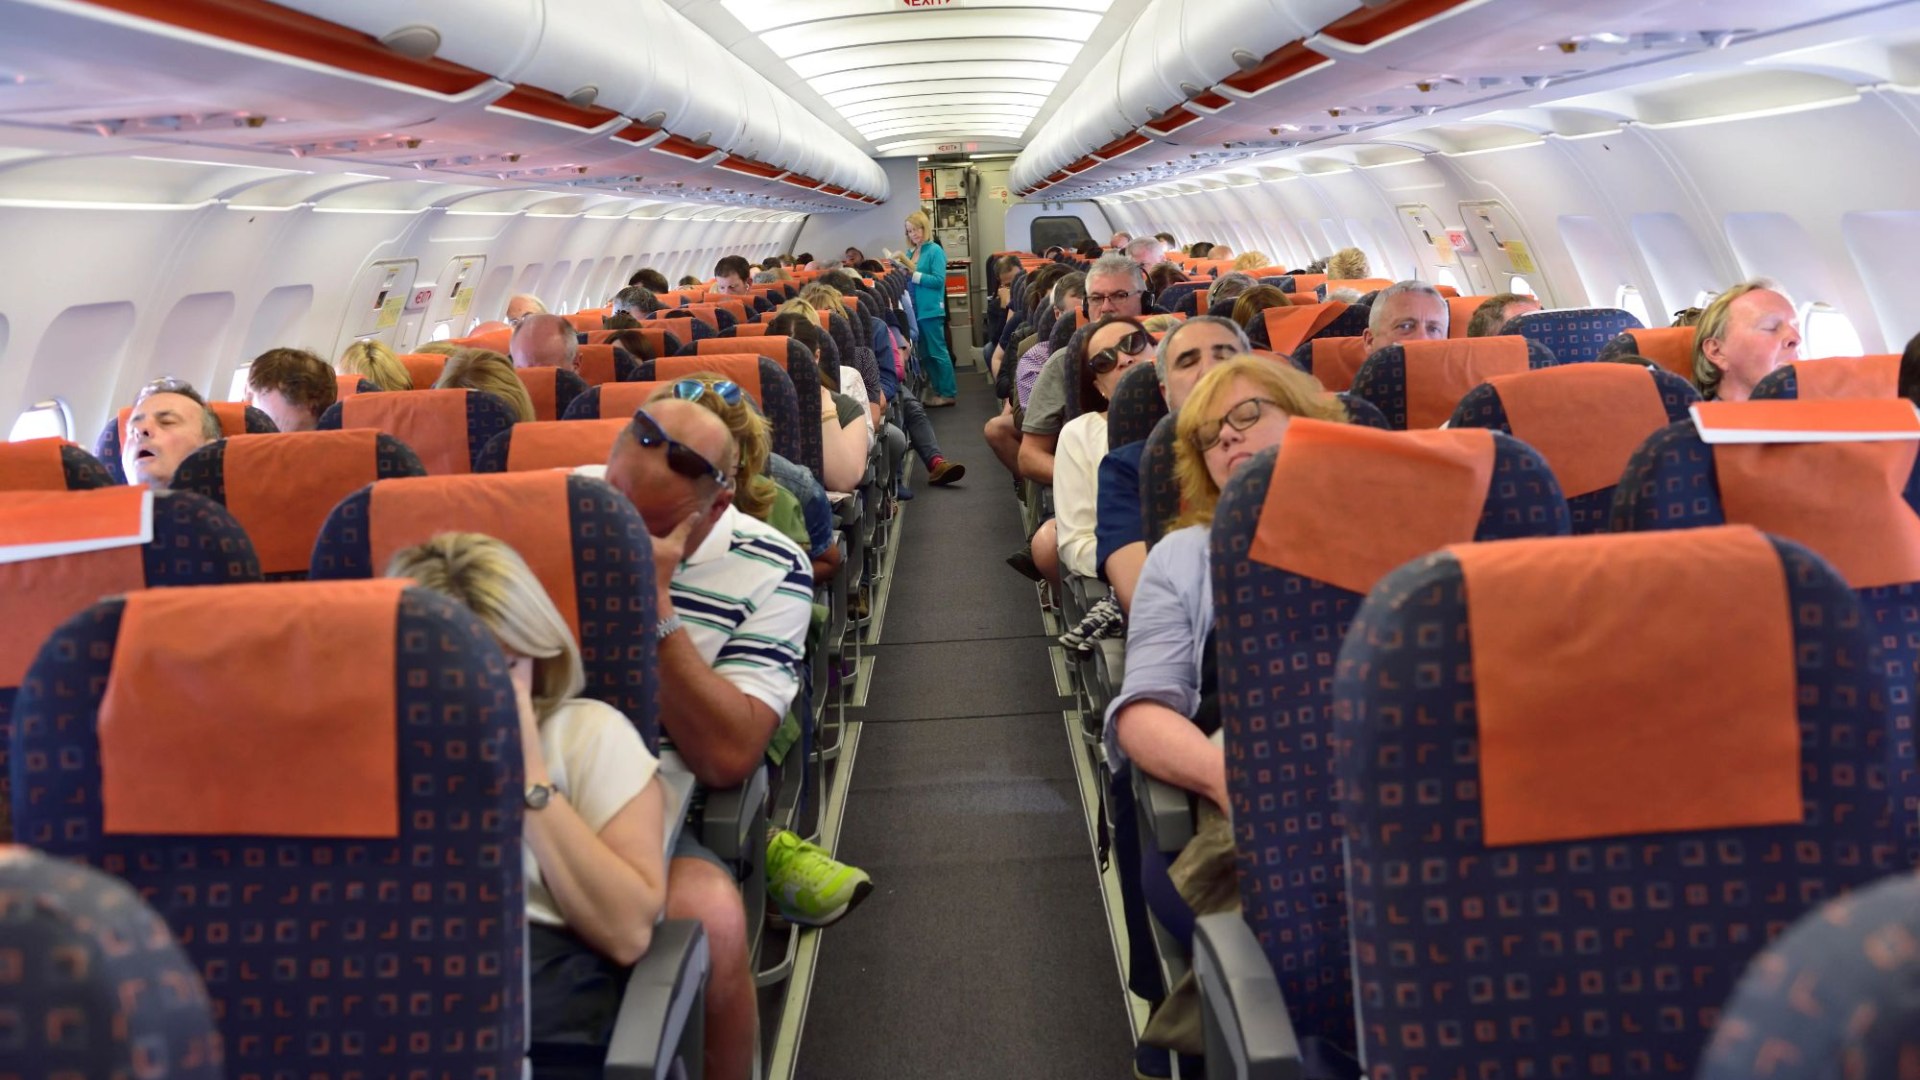 Flyers always make TWO mistakes when trying to sleep on plane, says airline boss – & warns it’ll make your jet lag worse [Video]